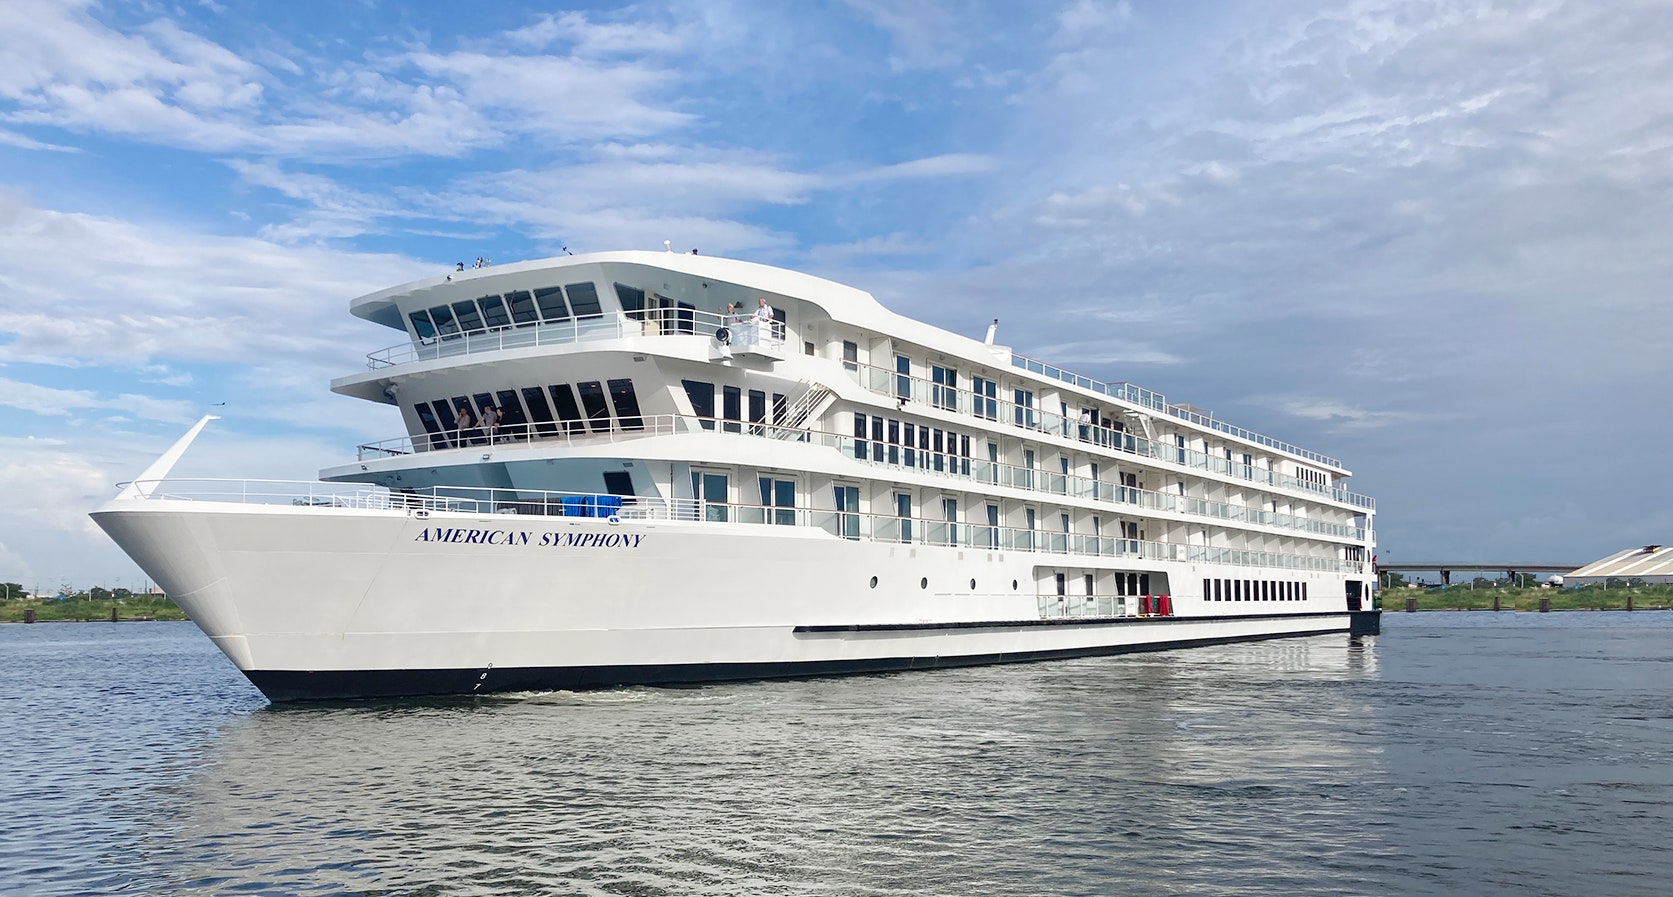 <p>Board the <em>American Symphony</em> cruise ship to visit Mark Twain’s hometown and experience the real-life inspiration behind <em>Life on the Mississippi,</em> the classic memoir chronicling the author's days on the river as a steamboat pilot.</p> <p>The 91-cabin <em>American Symphony,</em> recently inaugurated in 2022, has 100% private balcony accommodations and a unique bow that opens with a retractable gangway that can be extended for landings virtually anywhere. The ship also features lounges soaring 40 feet above the water with triple the glass of other riverboats for spectacular views. Comfy deck chairs welcome passengers to enjoy the undeveloped countryside, picturesque islands, and fascinating dams and navigation locks.</p> <p>Departing September 27, this itinerary features seven ports of call including Muscatine and Dubuque in Iowa, and Winona and Red Wing in Minnesota. In Hannibal, visit the actual home—with a whitewashed Tom Sawyer fence—where Samuel Clemens (Mark Twain) grew up. In Dubuque, see the 1989 “Field of Dreams” movie site known for the famous quote, “If you build it, they will come.”</p> <div class="callout"><p><a href="https://cna.st/affiliate-link/3DgAfmDFCbAvbr5n2SrZLmtEmnL1f9VGcaWSFo5txL15MLFaob7N2ADFU5Y56baV6RTVKxpV5B2T3HMU7QZPf22qtZdGg6wRvxN1JxeUgzu5HWJigoxhpJbwaSXAnKJUrkzA7Pedpmz9MtRQZh6yVoMGVBXwtjZR34wTYvHZt7VrgMnBGufnADhCUmCMfdhB5dK9wXFh8kEQJsNxt4vnMxP7x6gbQiD" rel="sponsored" title="Book with American Cruise Lines">Book with American Cruise Lines</a></p> </div><p>Sign up to receive the latest news, expert tips, and inspiration on all things travel</p><a href="https://www.cntraveler.com/newsletter/the-daily?sourceCode=msnsend">Inspire Me</a>